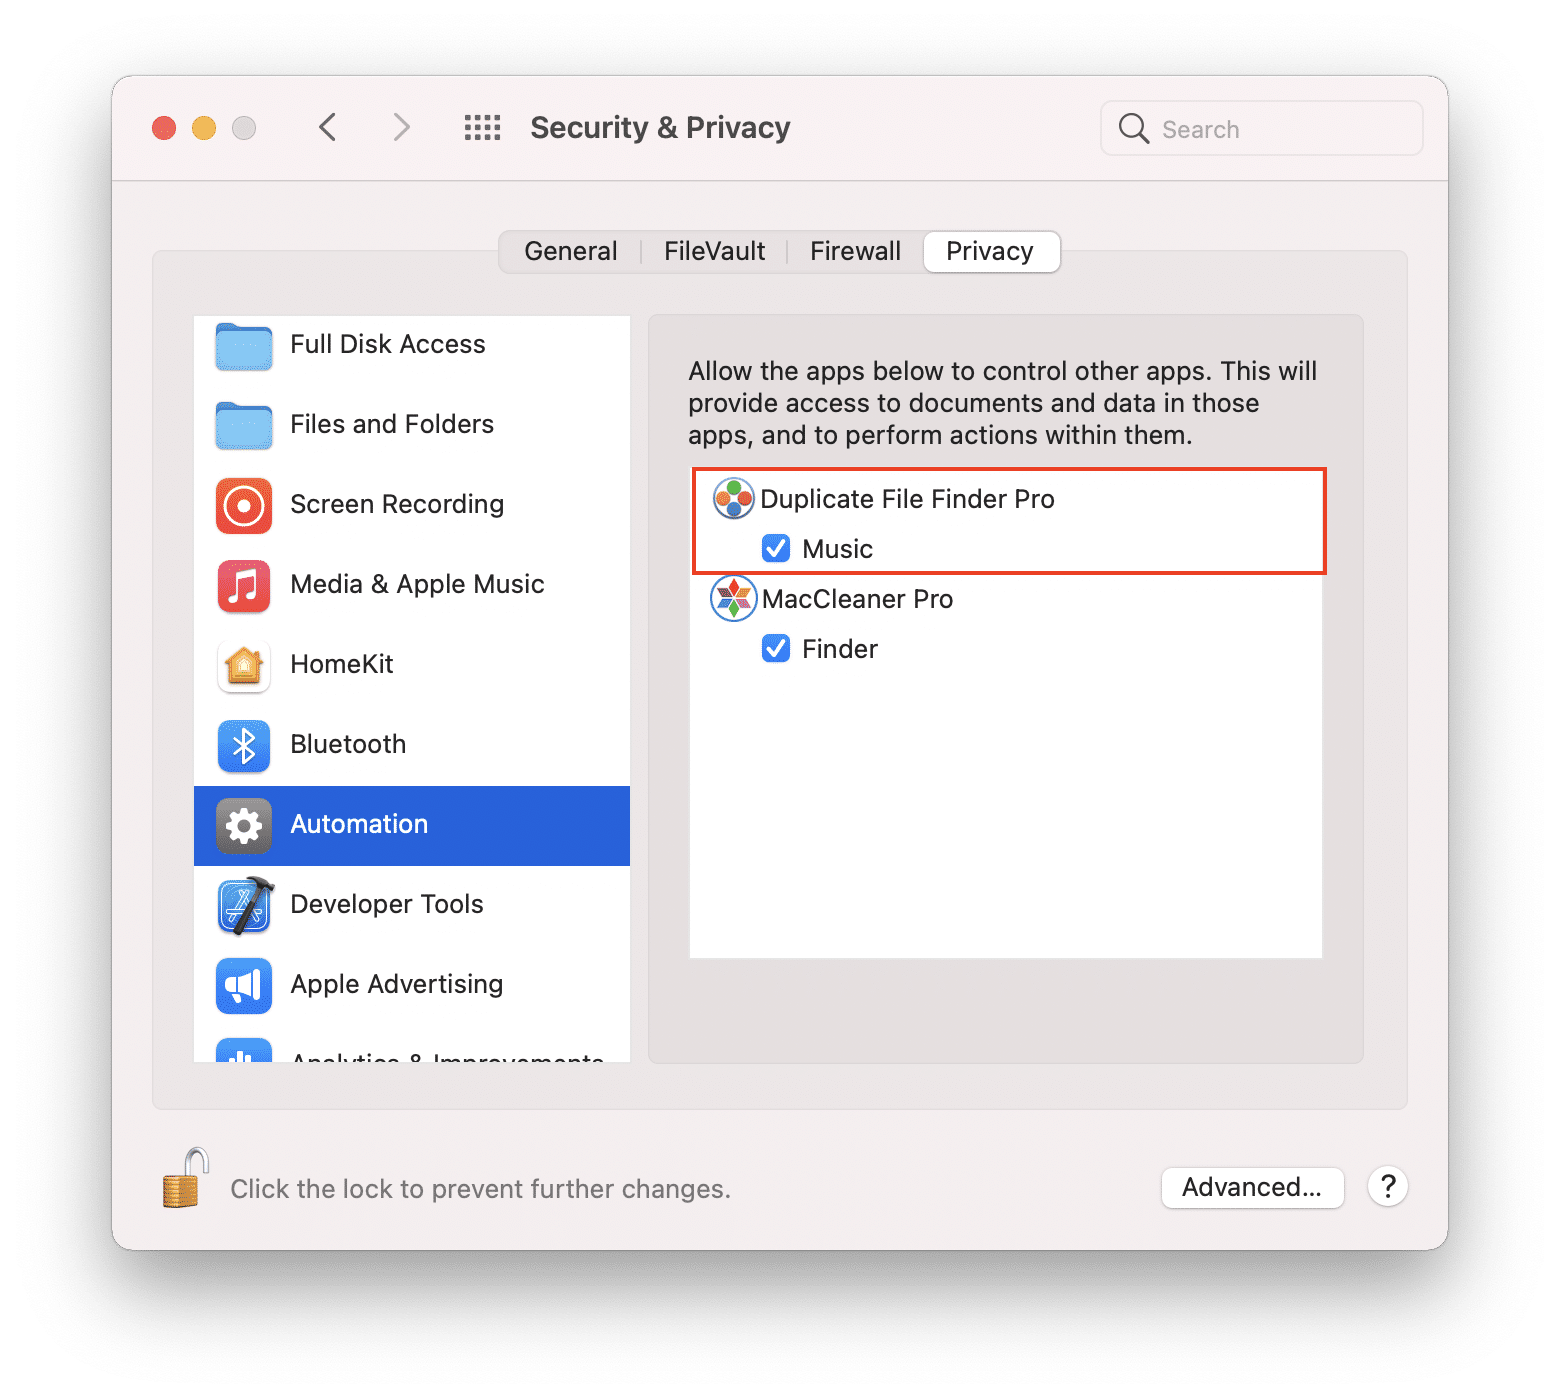 Mac Security & Privacy panel showing access to Music for Duplicate File Finder